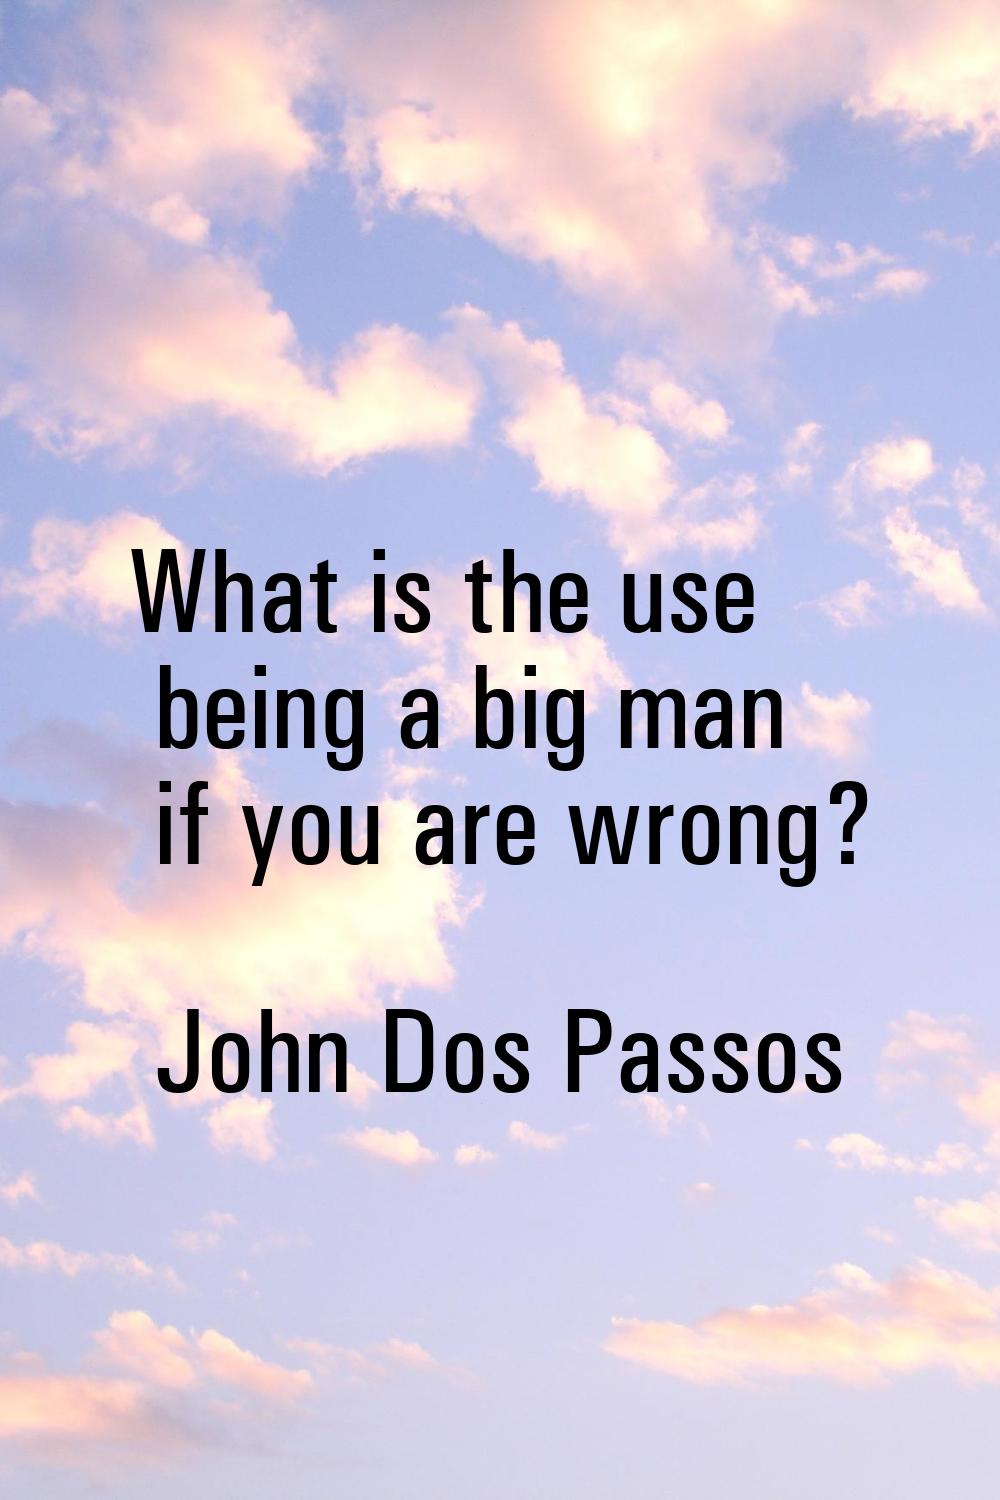 What is the use being a big man if you are wrong?